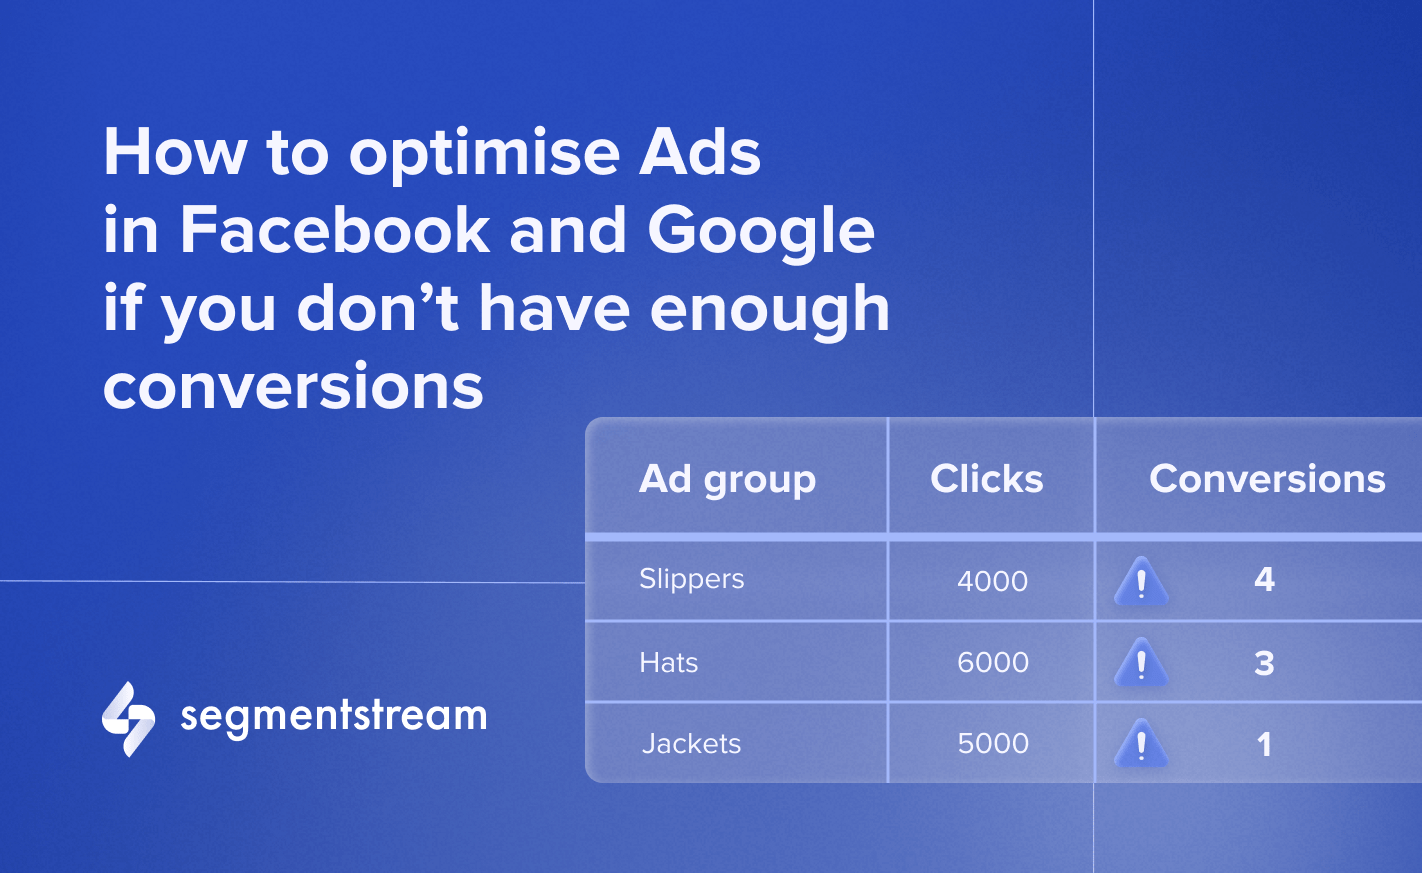 How to optimise Facebook Ads and Google Ads if you don’t have enough conversions